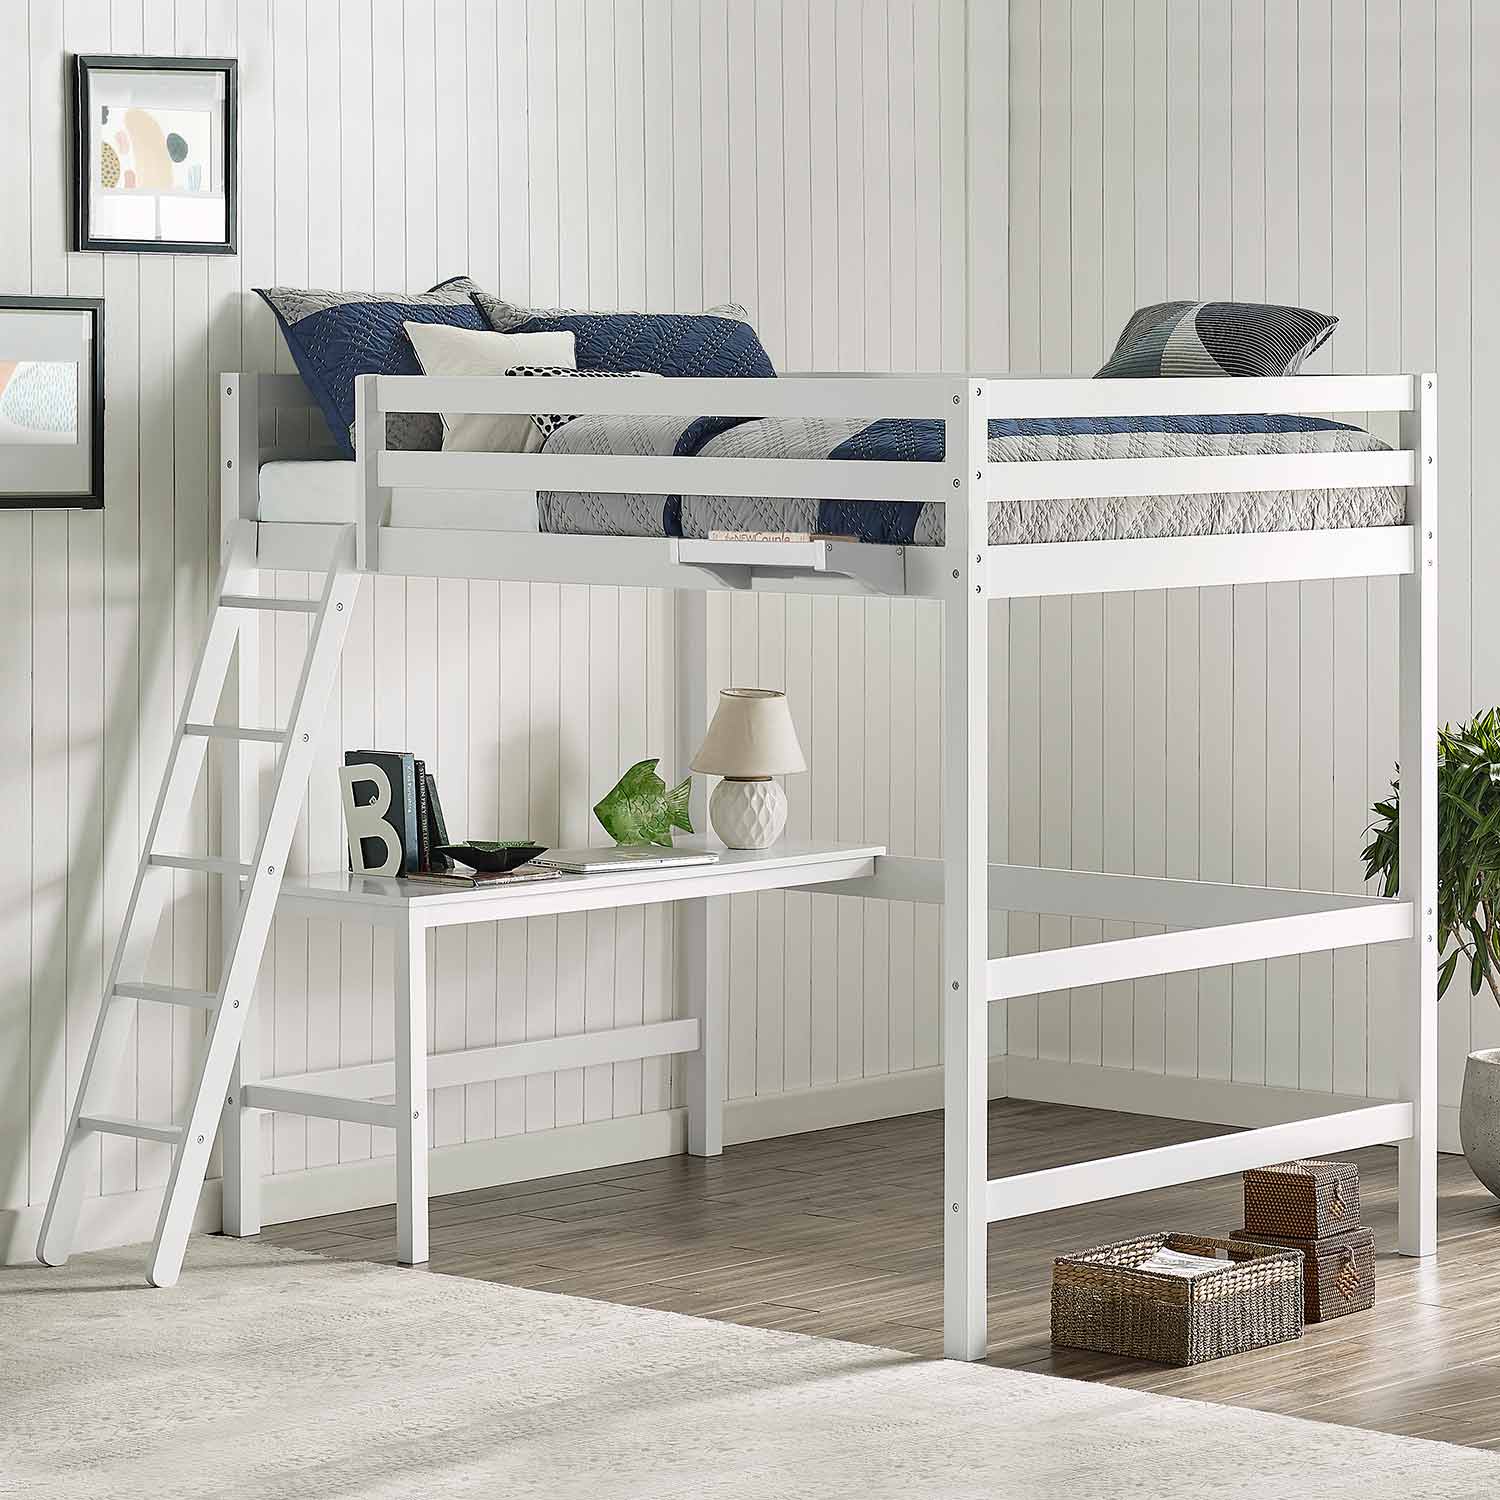 Hillsdale Caspian Full Loft Bed with Hanging Nightstand - White